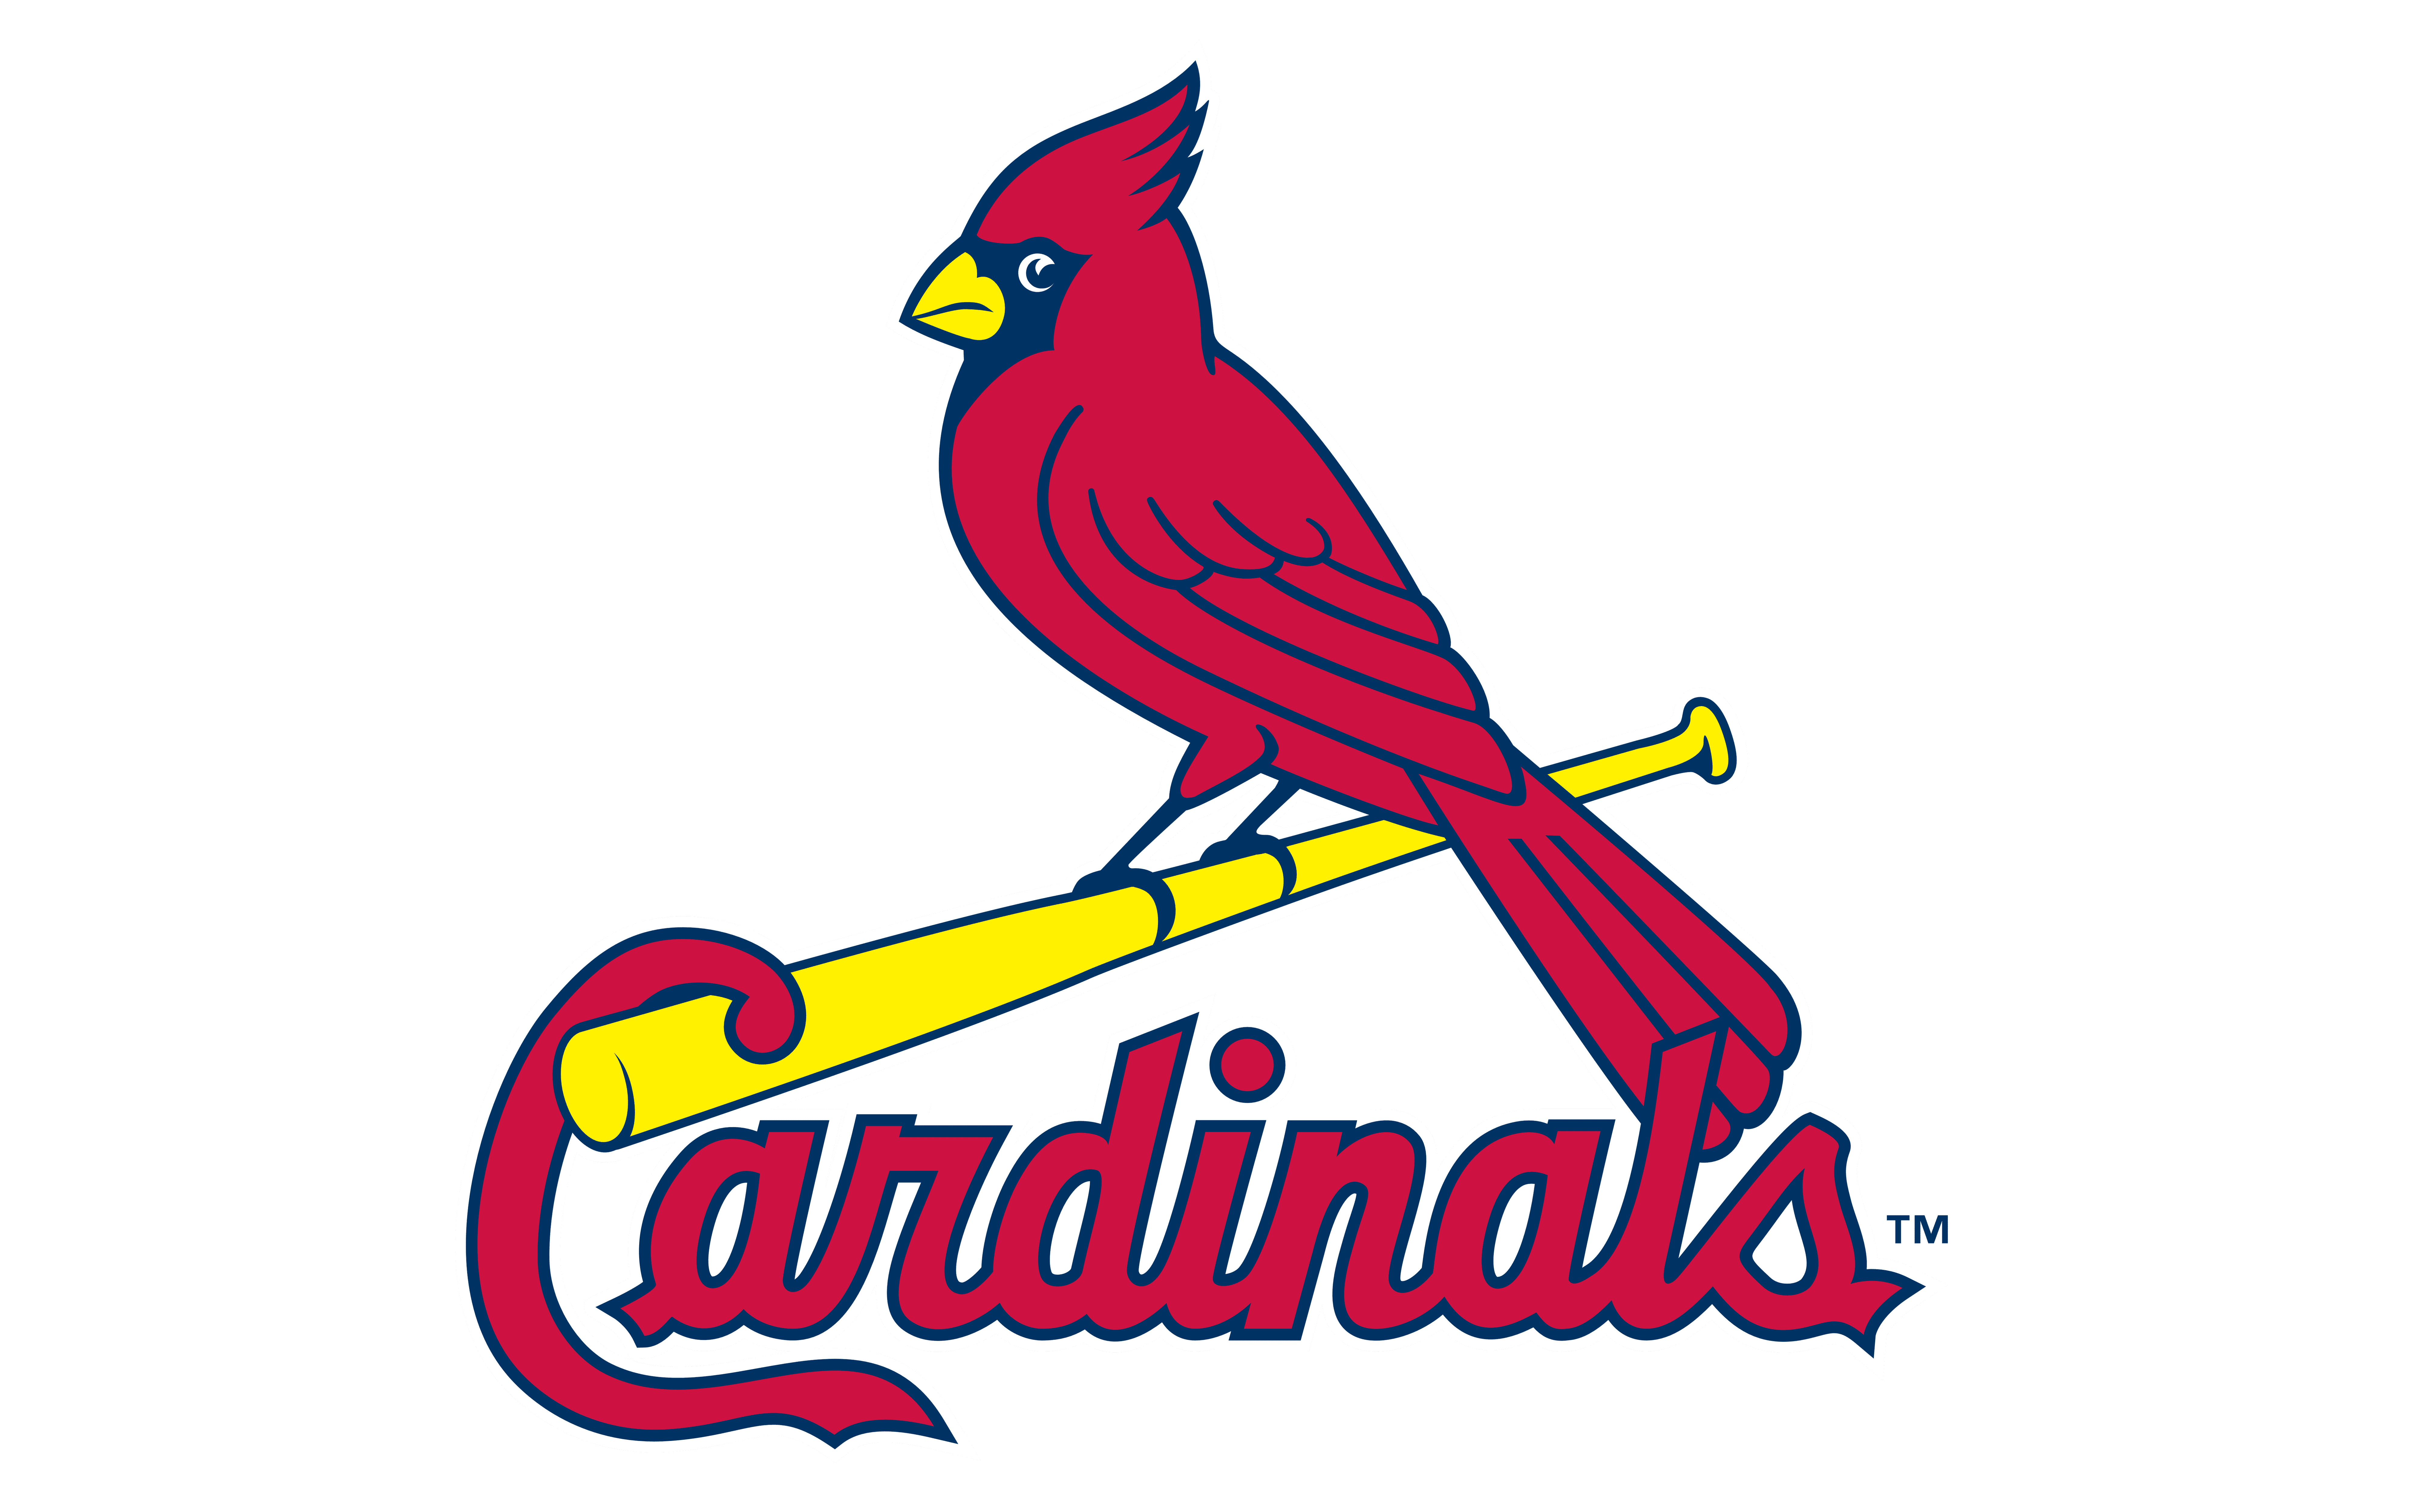 Why the Cardinals revamped its 'STL' logo - St. Louis Business Journal